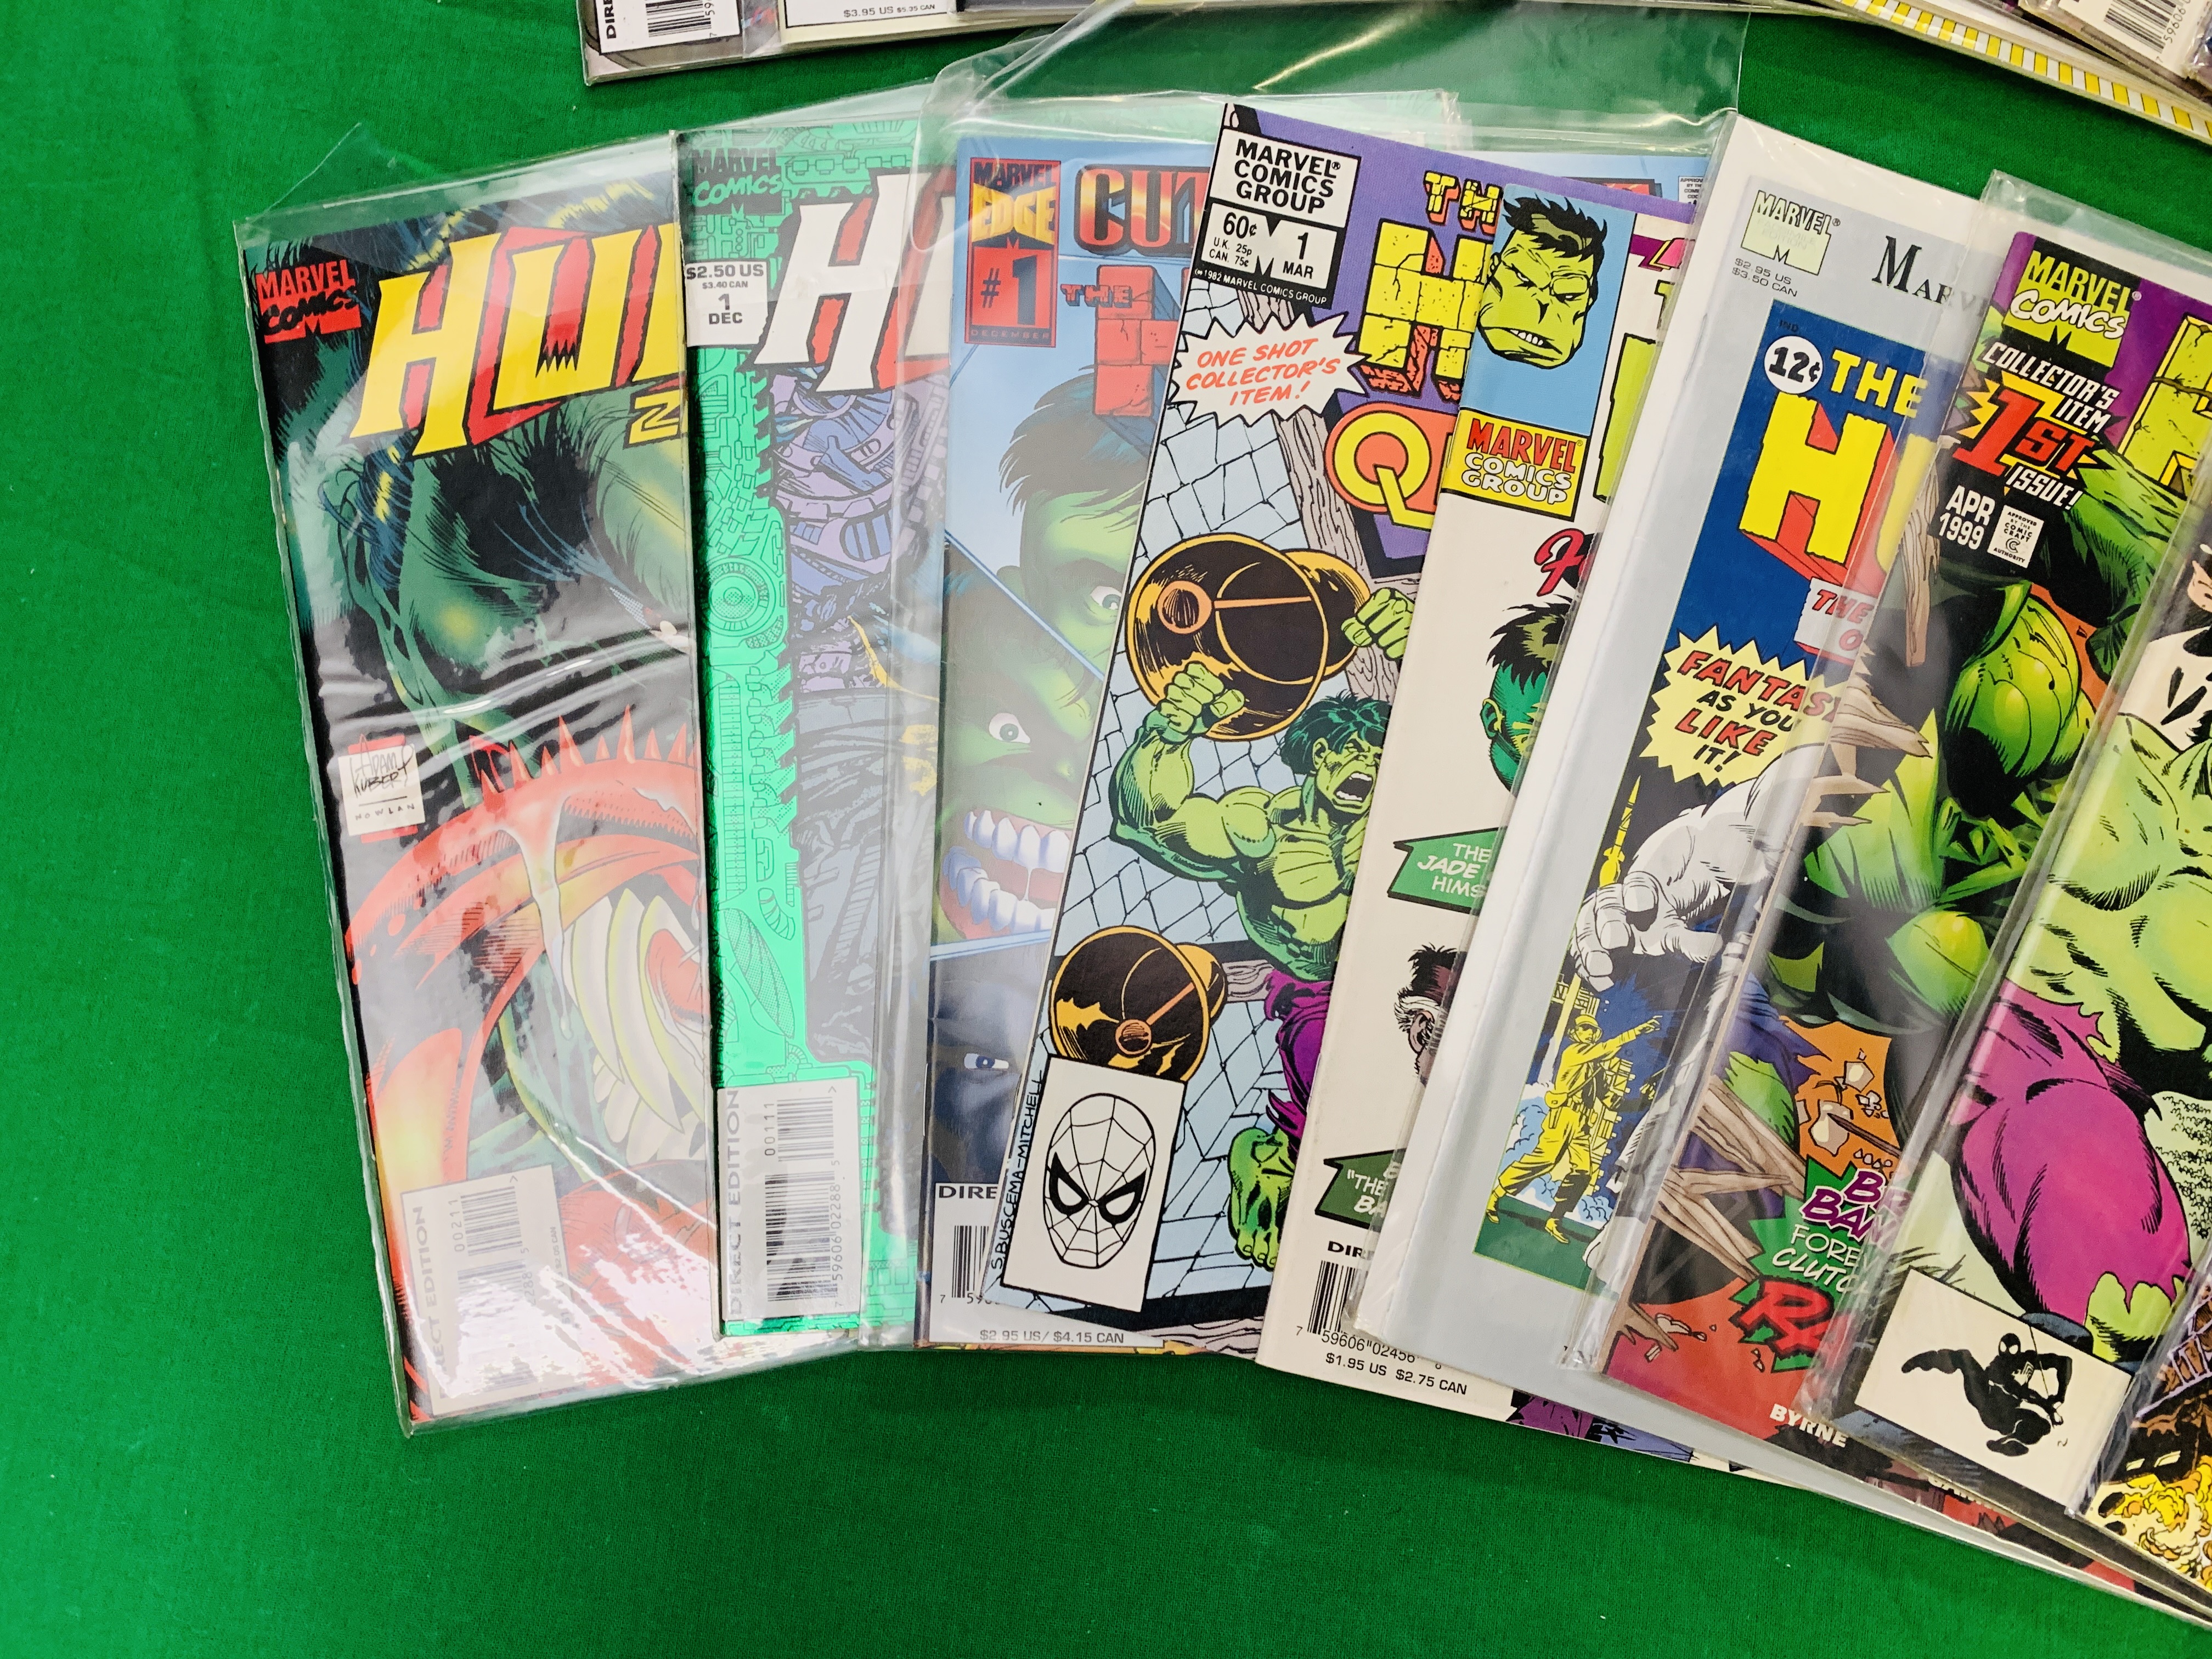 COLLECTION OF HULK MARVEL COMICS: HULK 2099 NO. 1 - 5, 10 FROM 1994. NO. 2 - 4 HAVE RUSTY STAPLES. - Image 4 of 5